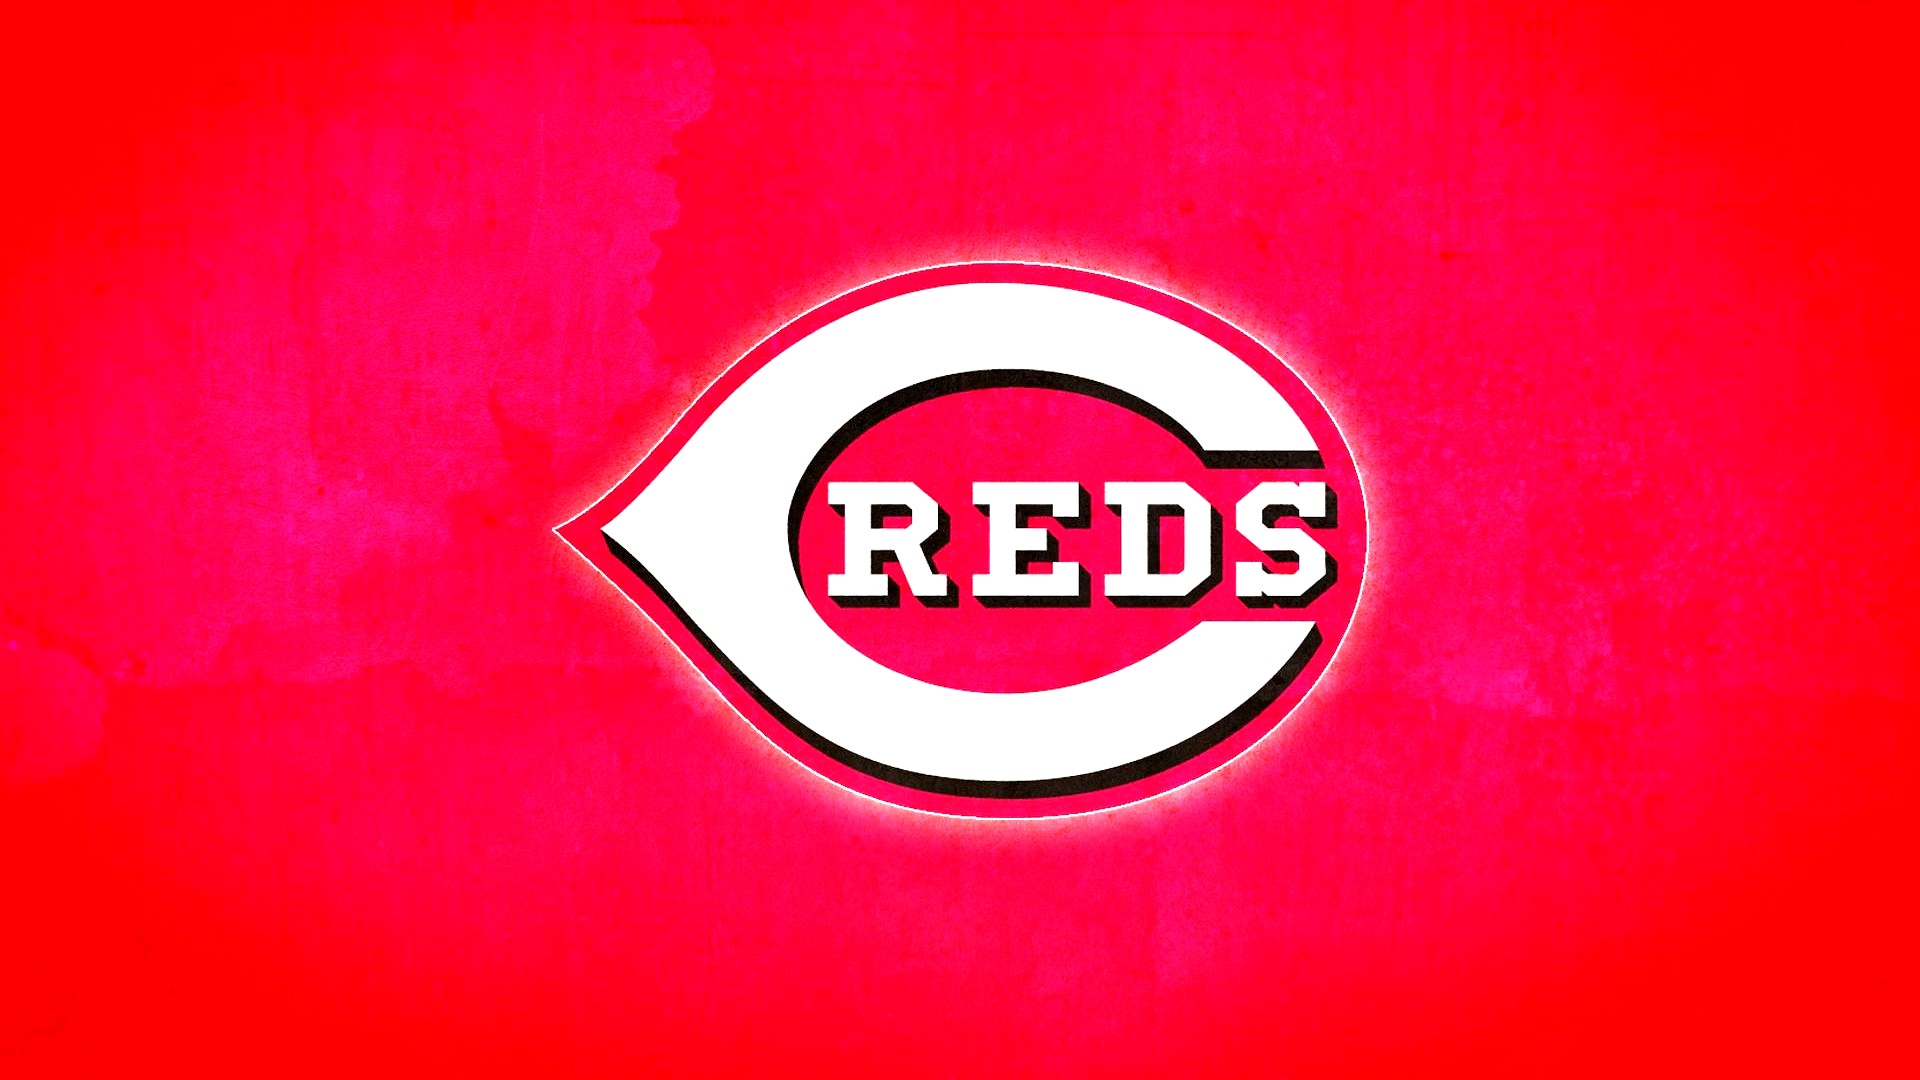 Cincinnati Reds MLB Wallpaper HD with high-resolution 1920x1080 pixel. You can use this wallpaper for Mac Desktop Wallpaper, Laptop Screensavers, Android Wallpapers, Tablet or iPhone Home Screen and another mobile phone device